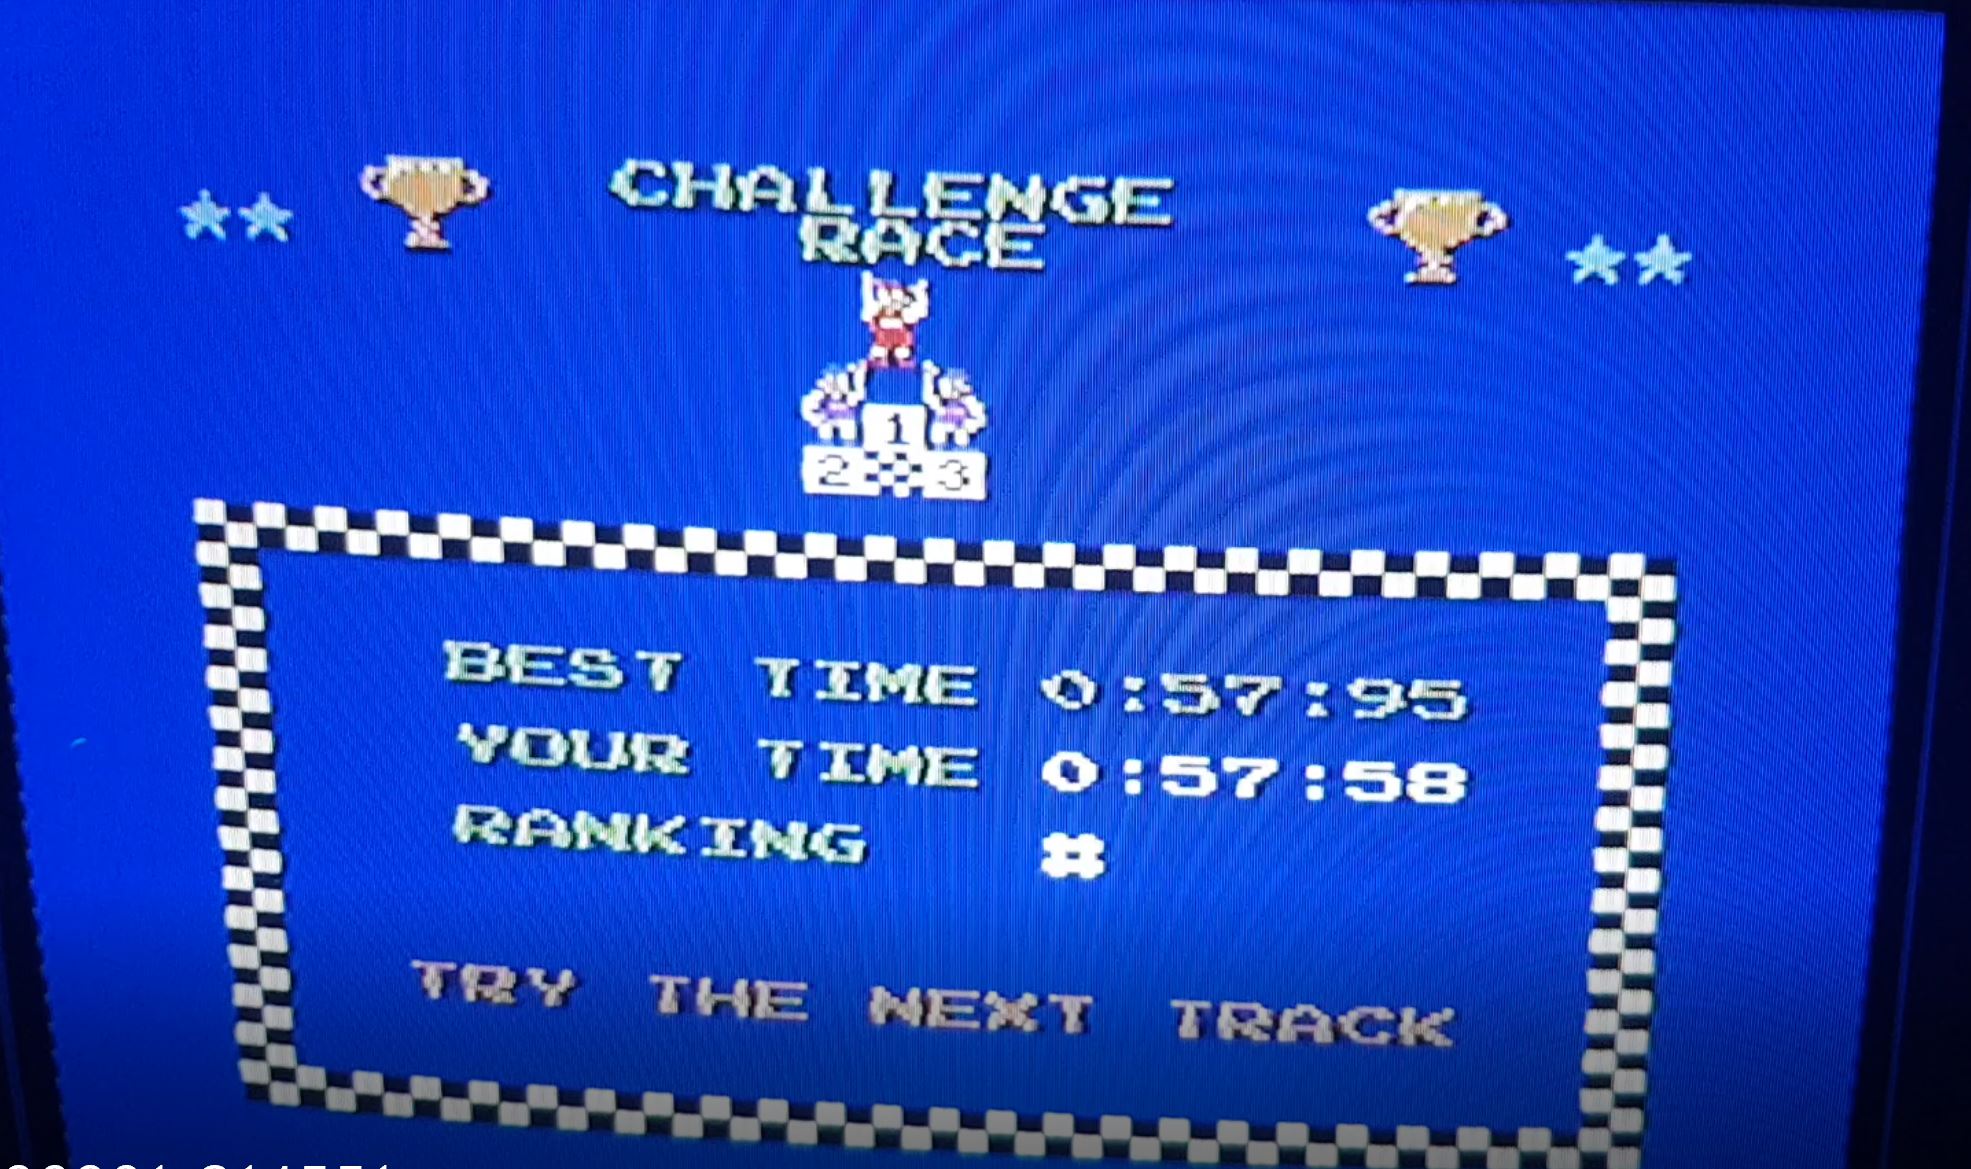 Excitebike: Track 1 time of 0:00:57.58